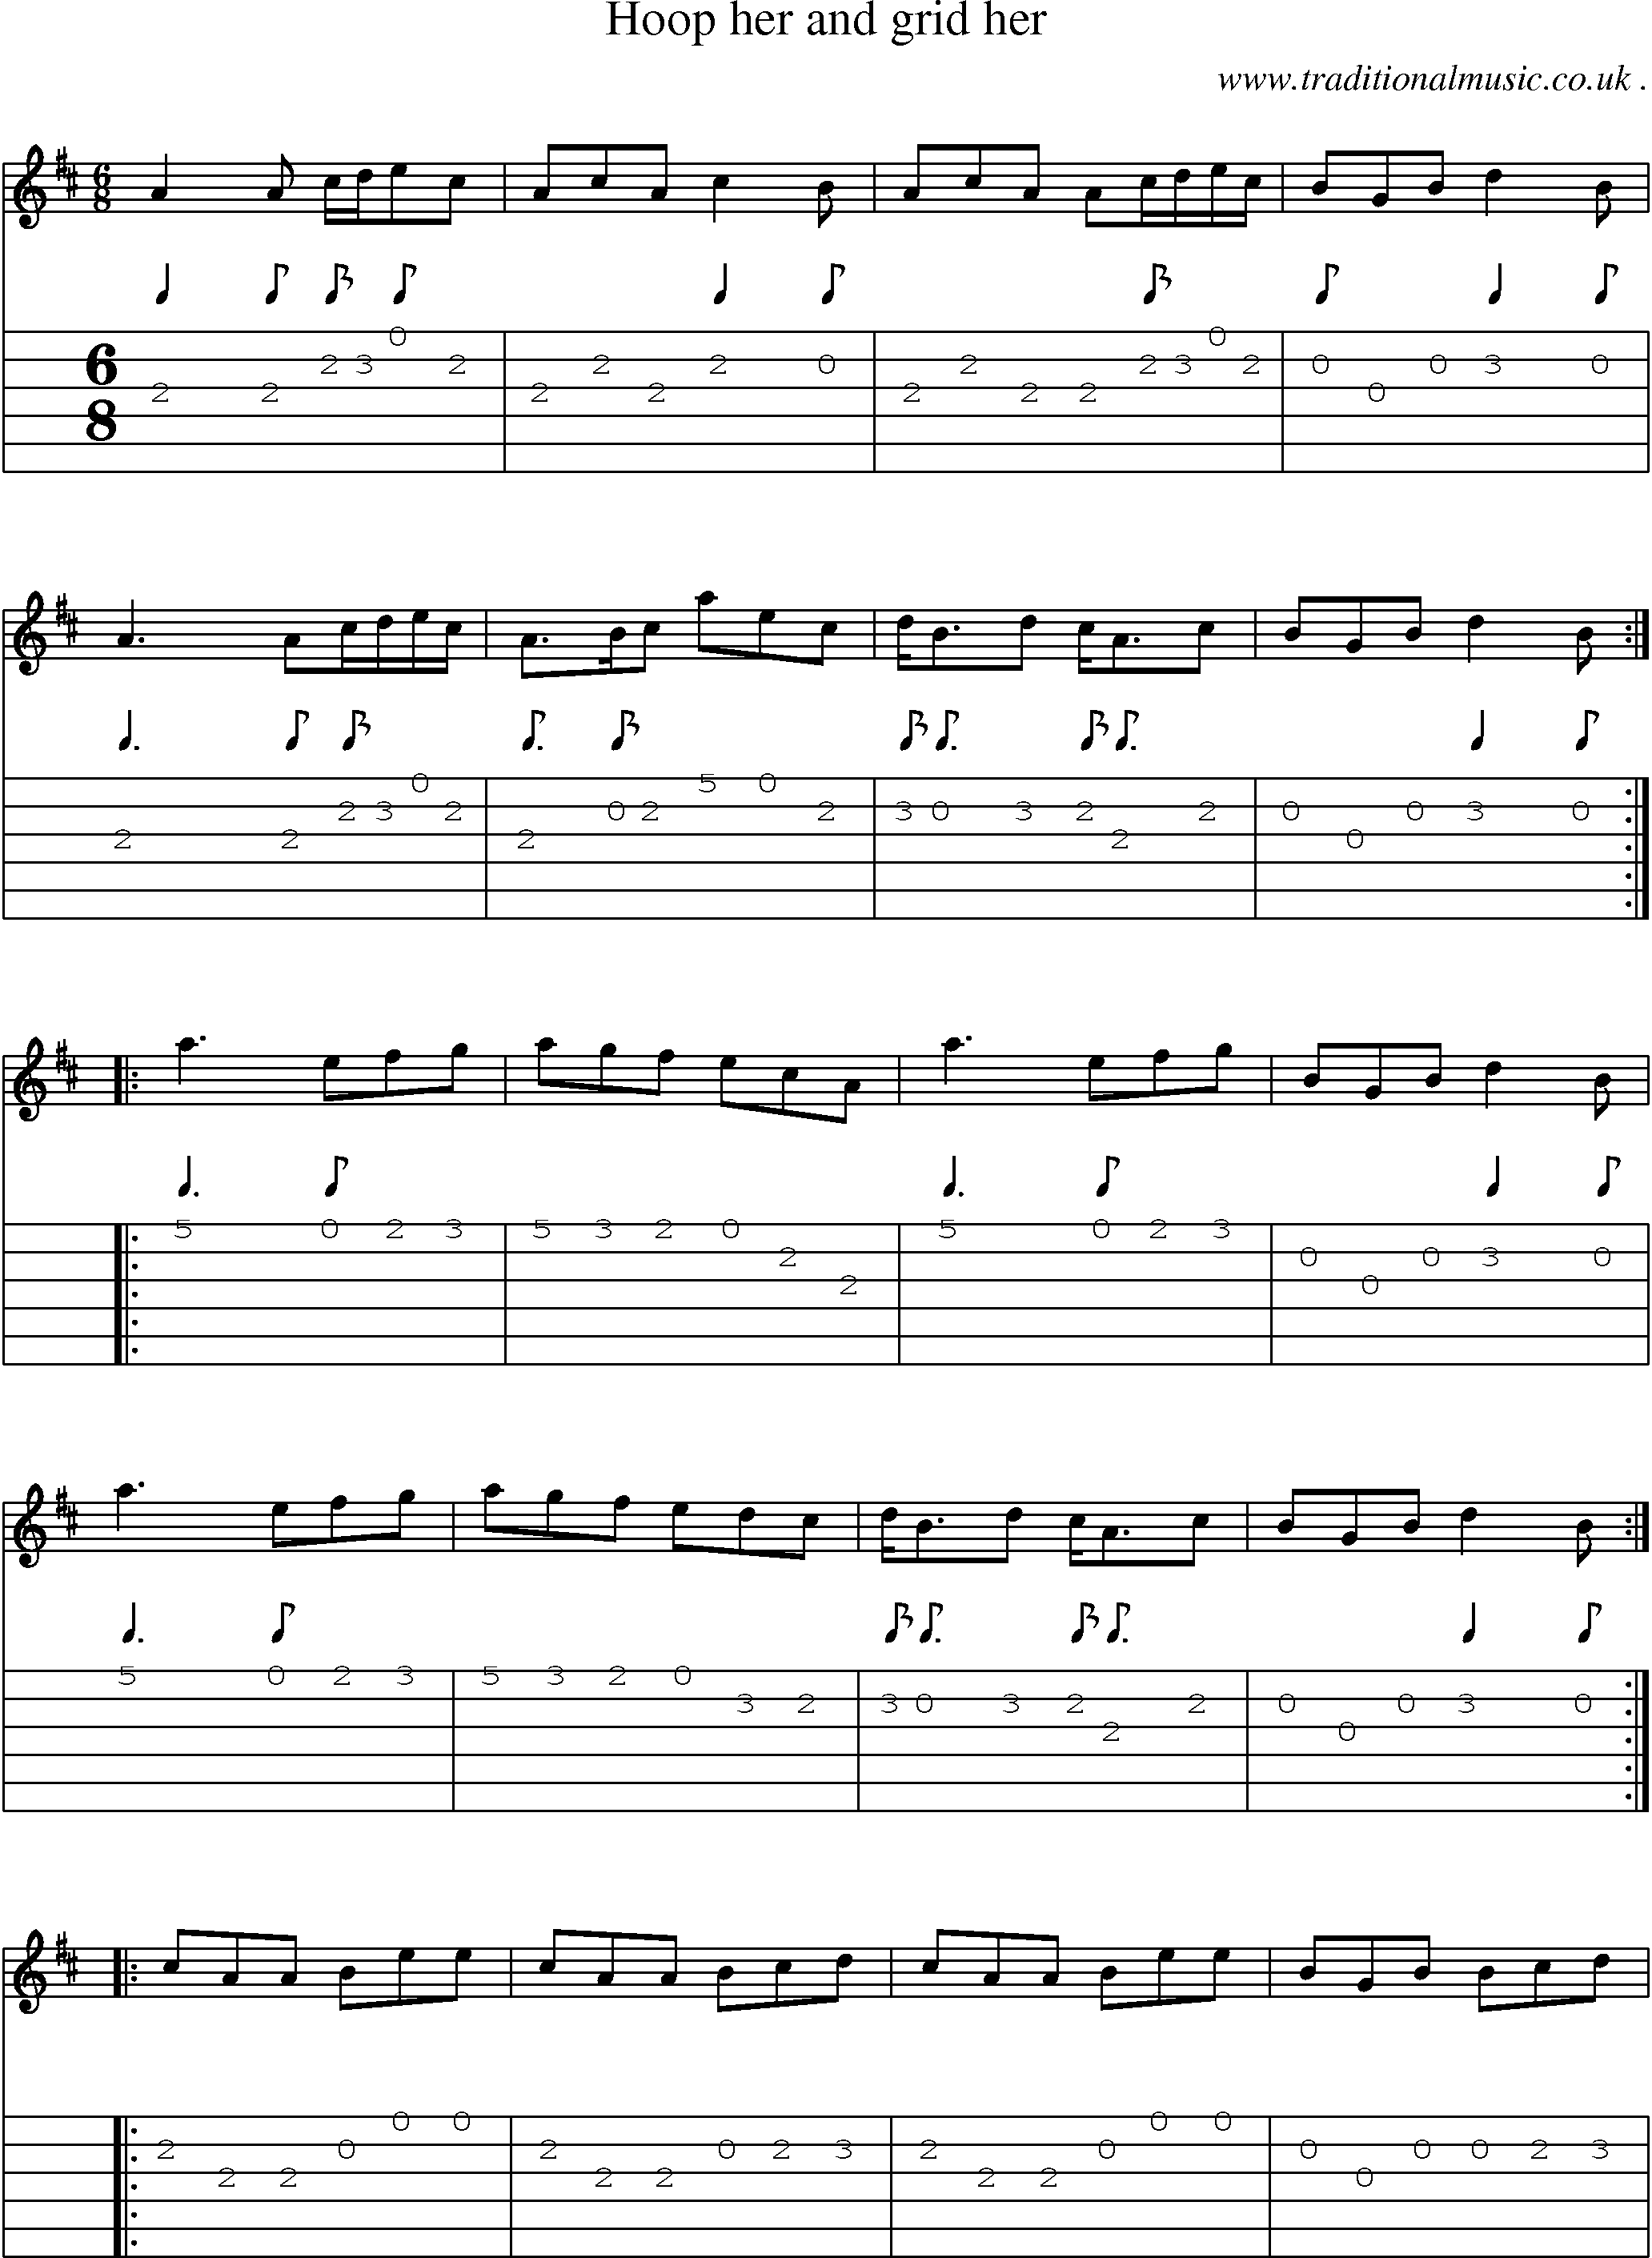 Sheet-Music and Guitar Tabs for Hoop Her And Grid Her